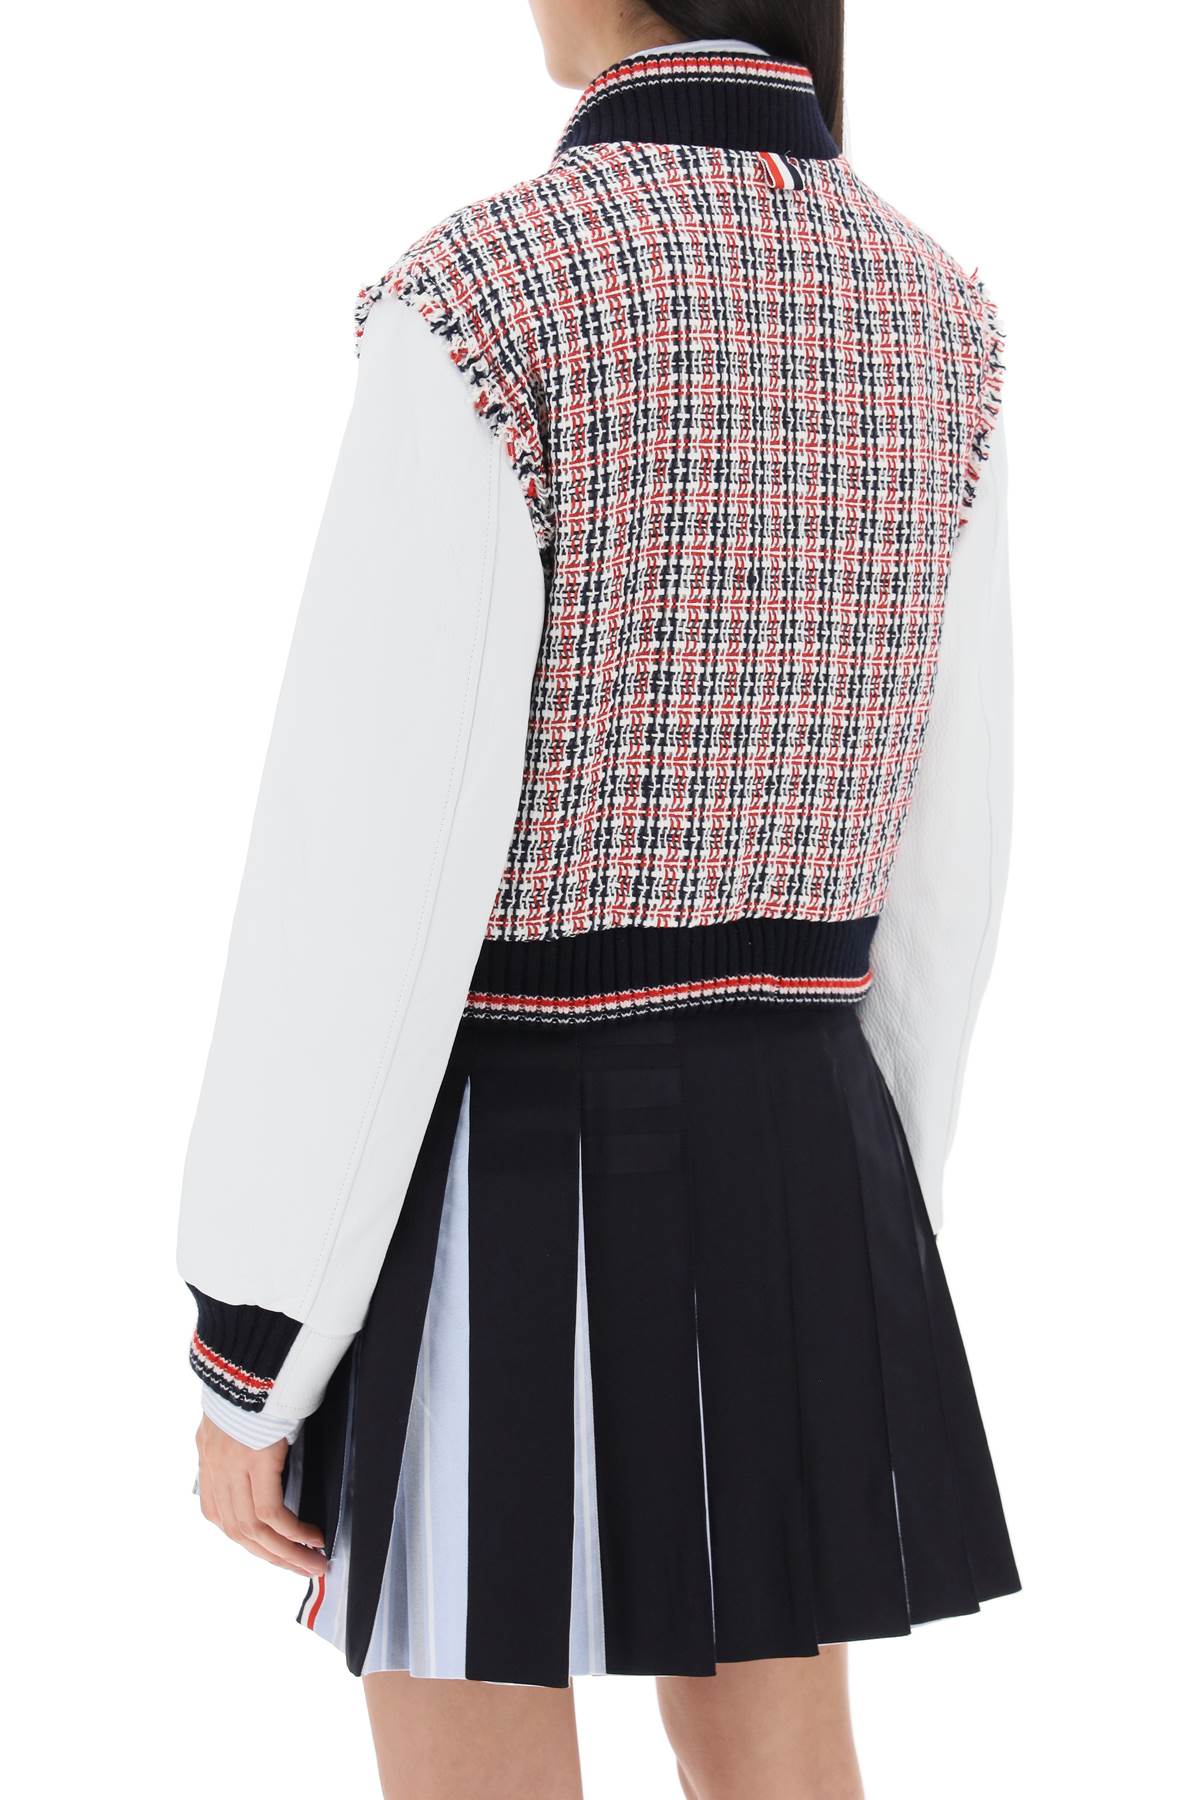 THOM BROWNE Mixed Colours Tweed Bomber Jacket with Leather Sleeves for Women